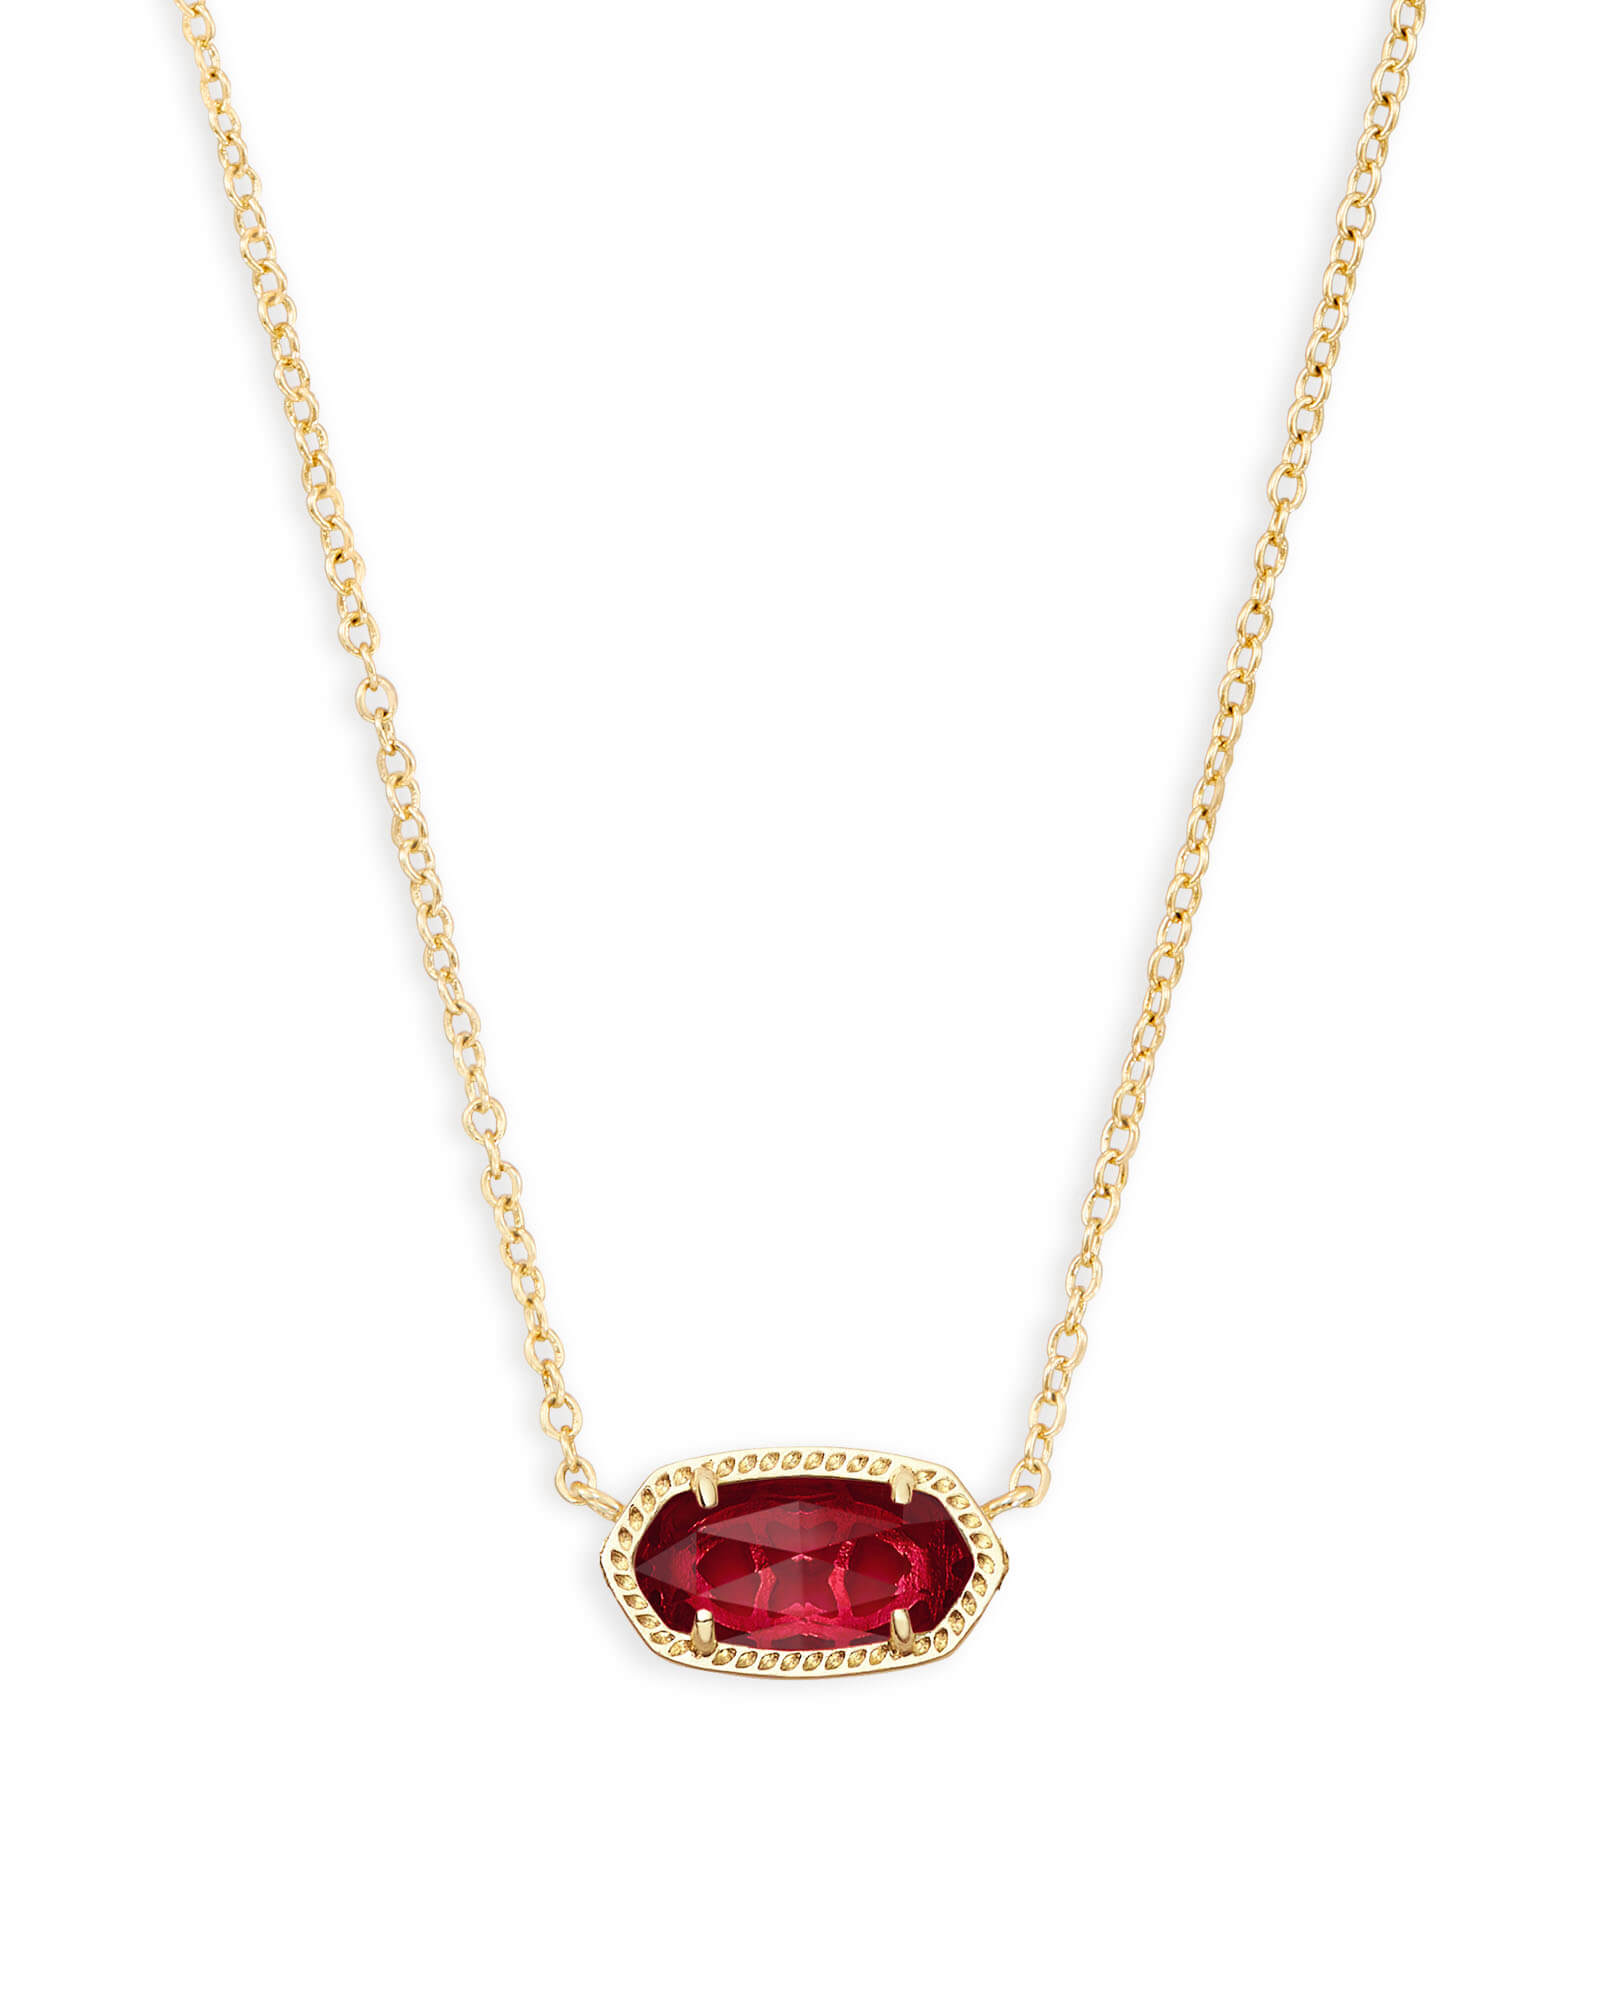 Elisa Gold Pendant Necklace in Red Berry | Kendra Scott